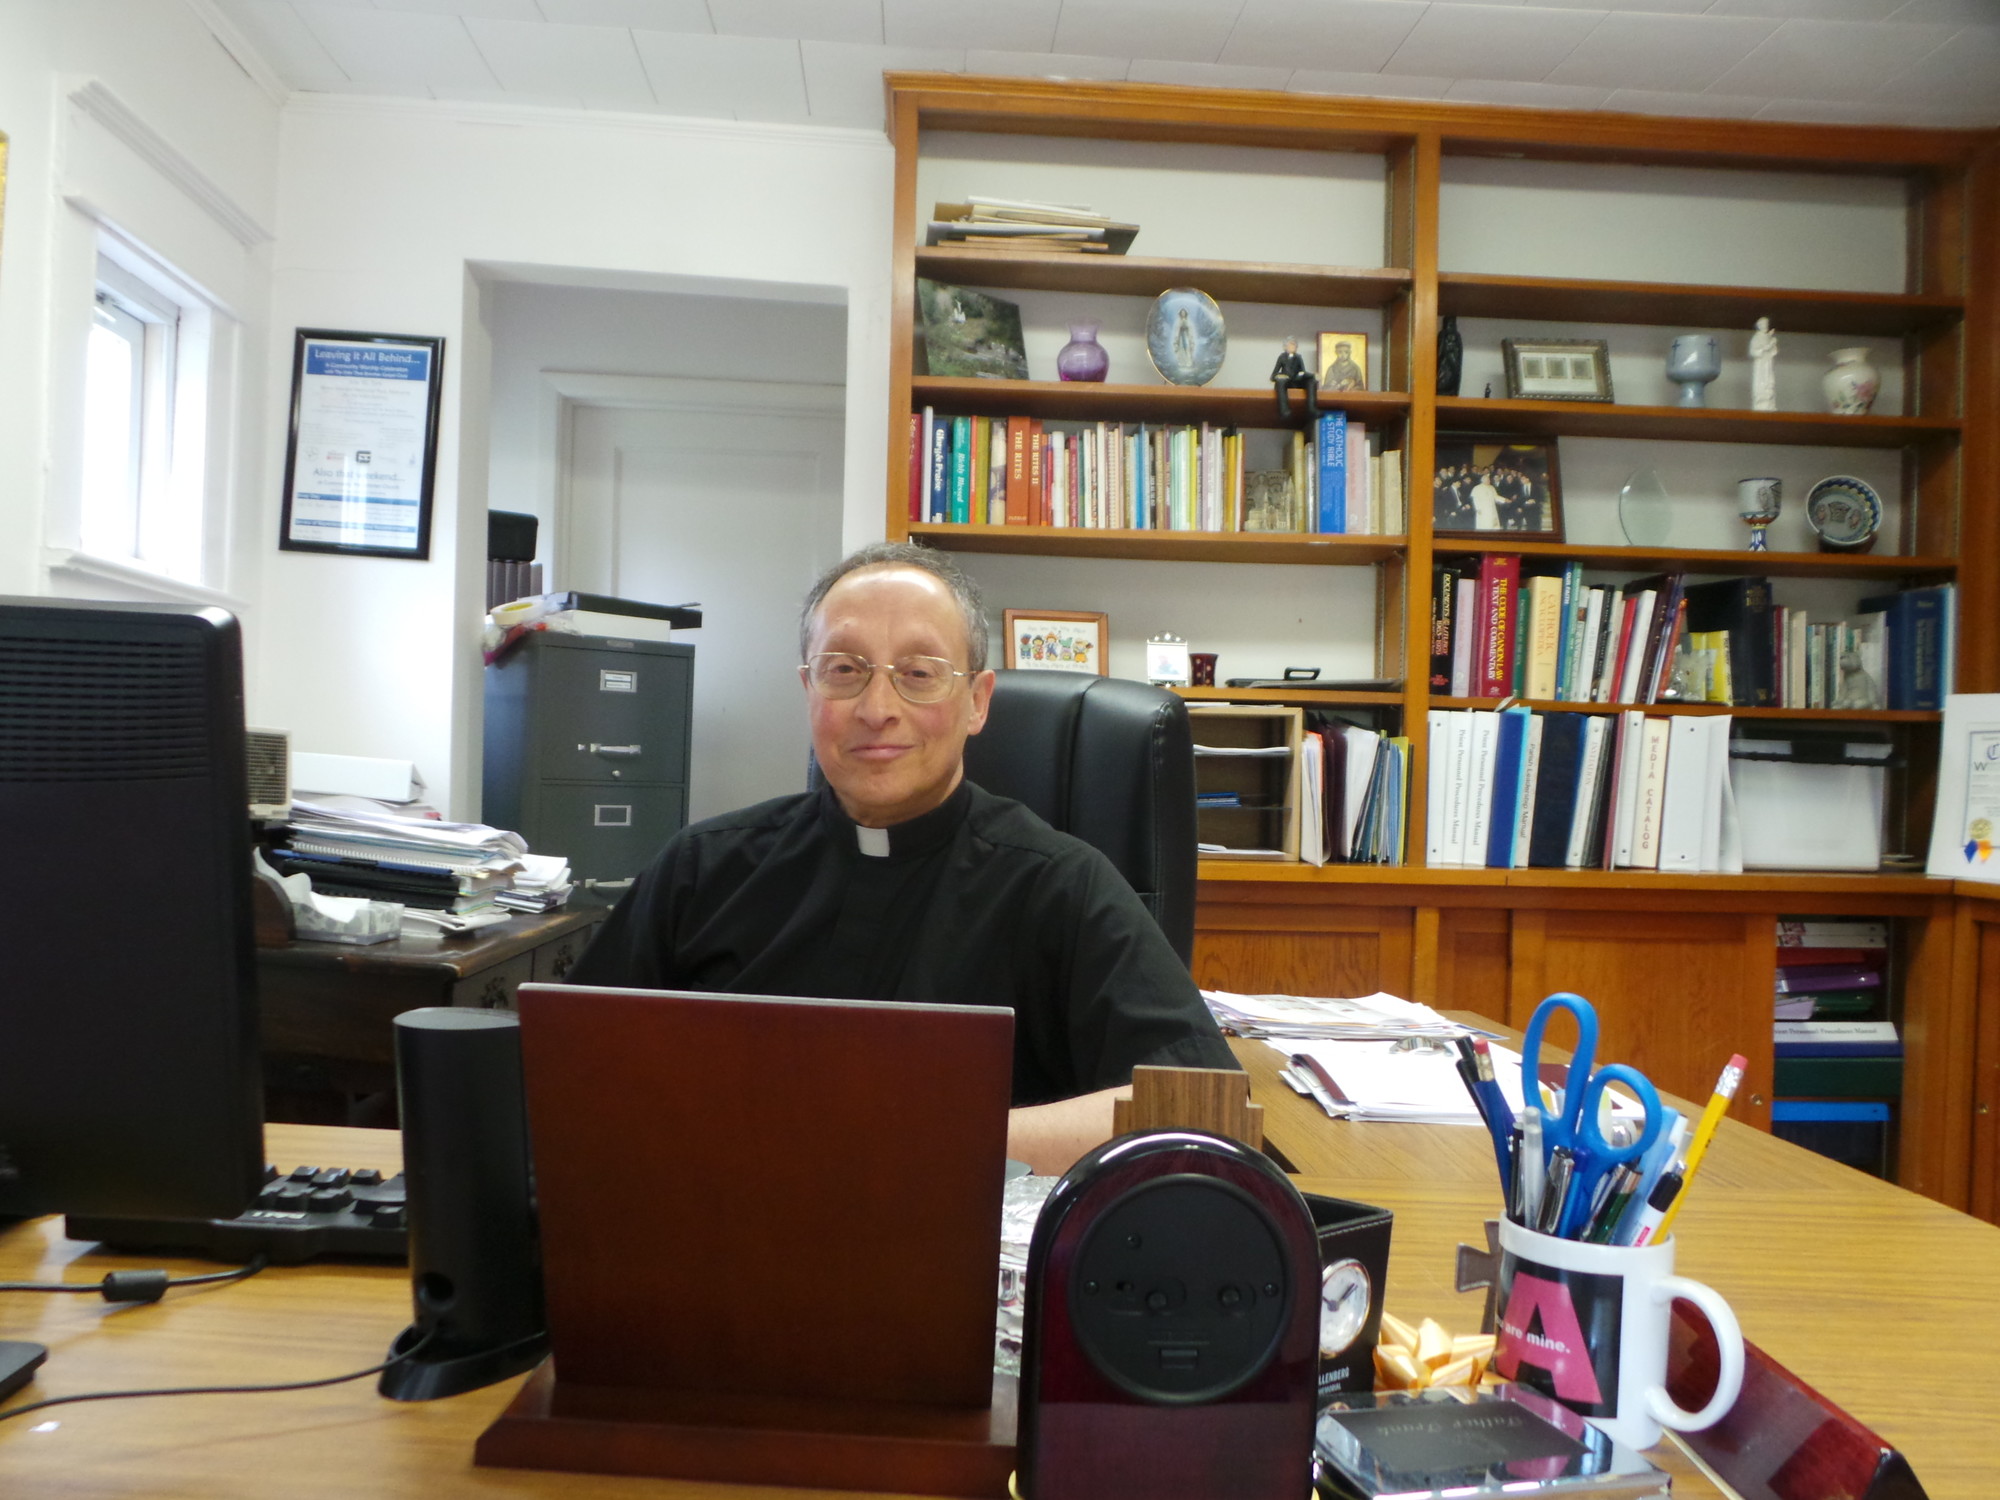 Father Frank Parisi in his office at Our Lady of Lourdes last week.